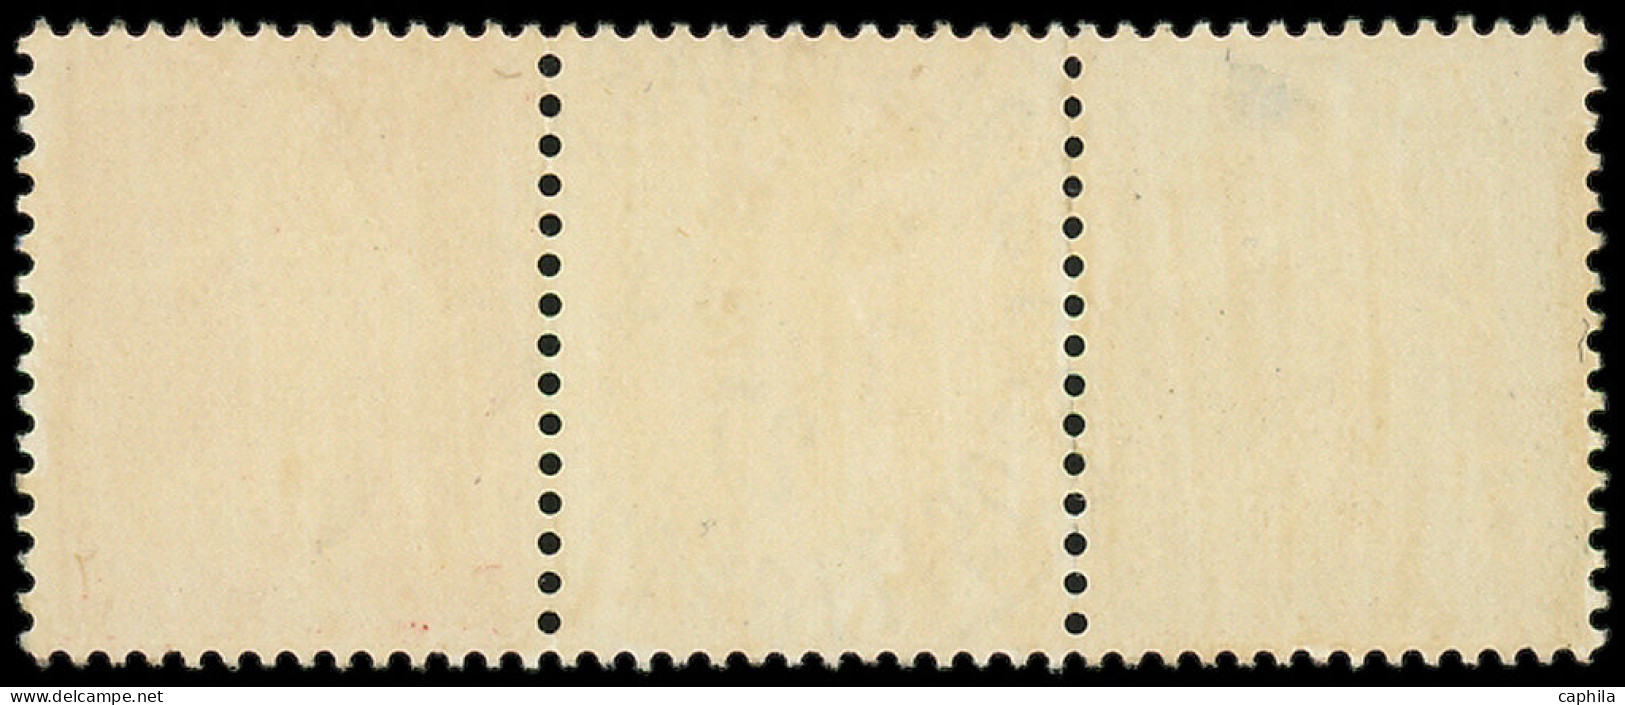 O FRANCE - Poste - 242A, Paire Avec Intervalle, Oblitération Fausse: Expo De Strasbourg - Used Stamps